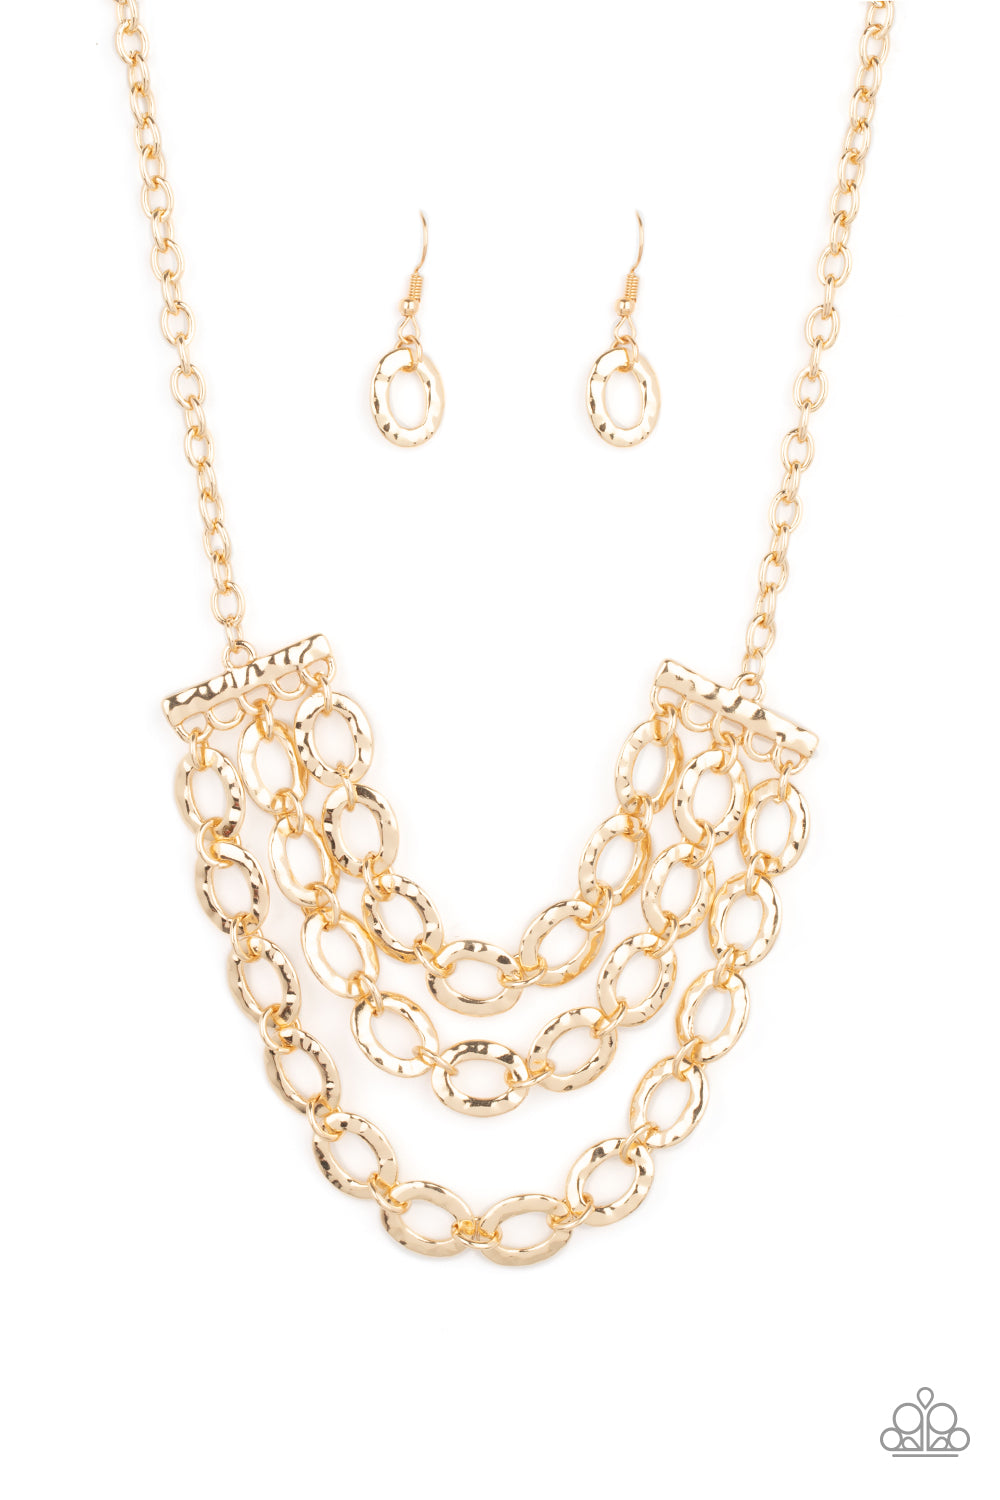 Paparazzi Repeat After Me - Gold Necklace - A Finishing Touch Jewelry